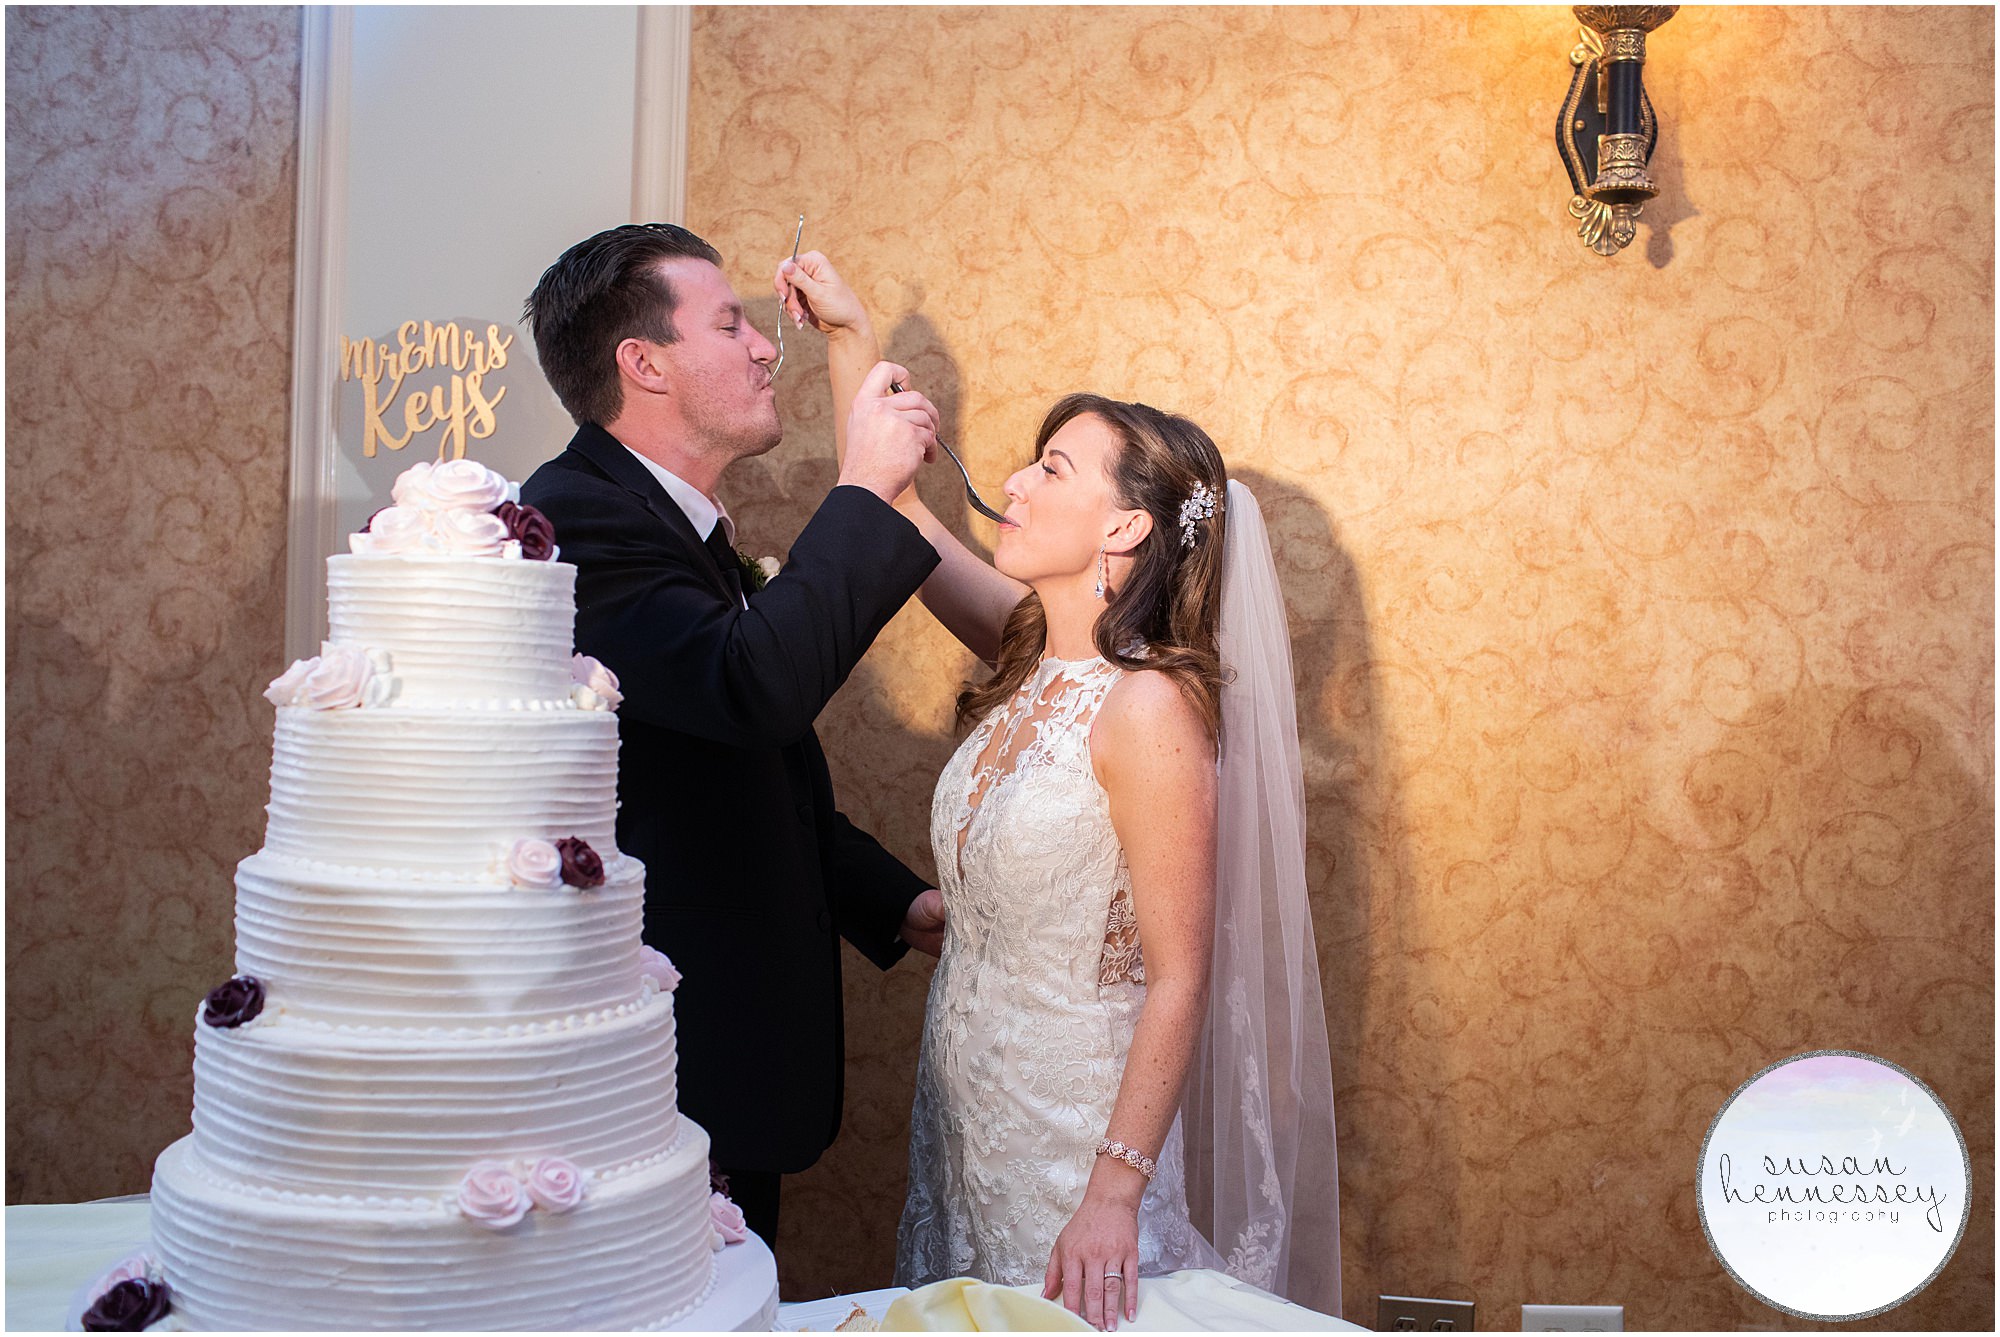 Cake cutting at wedding in South Jersey